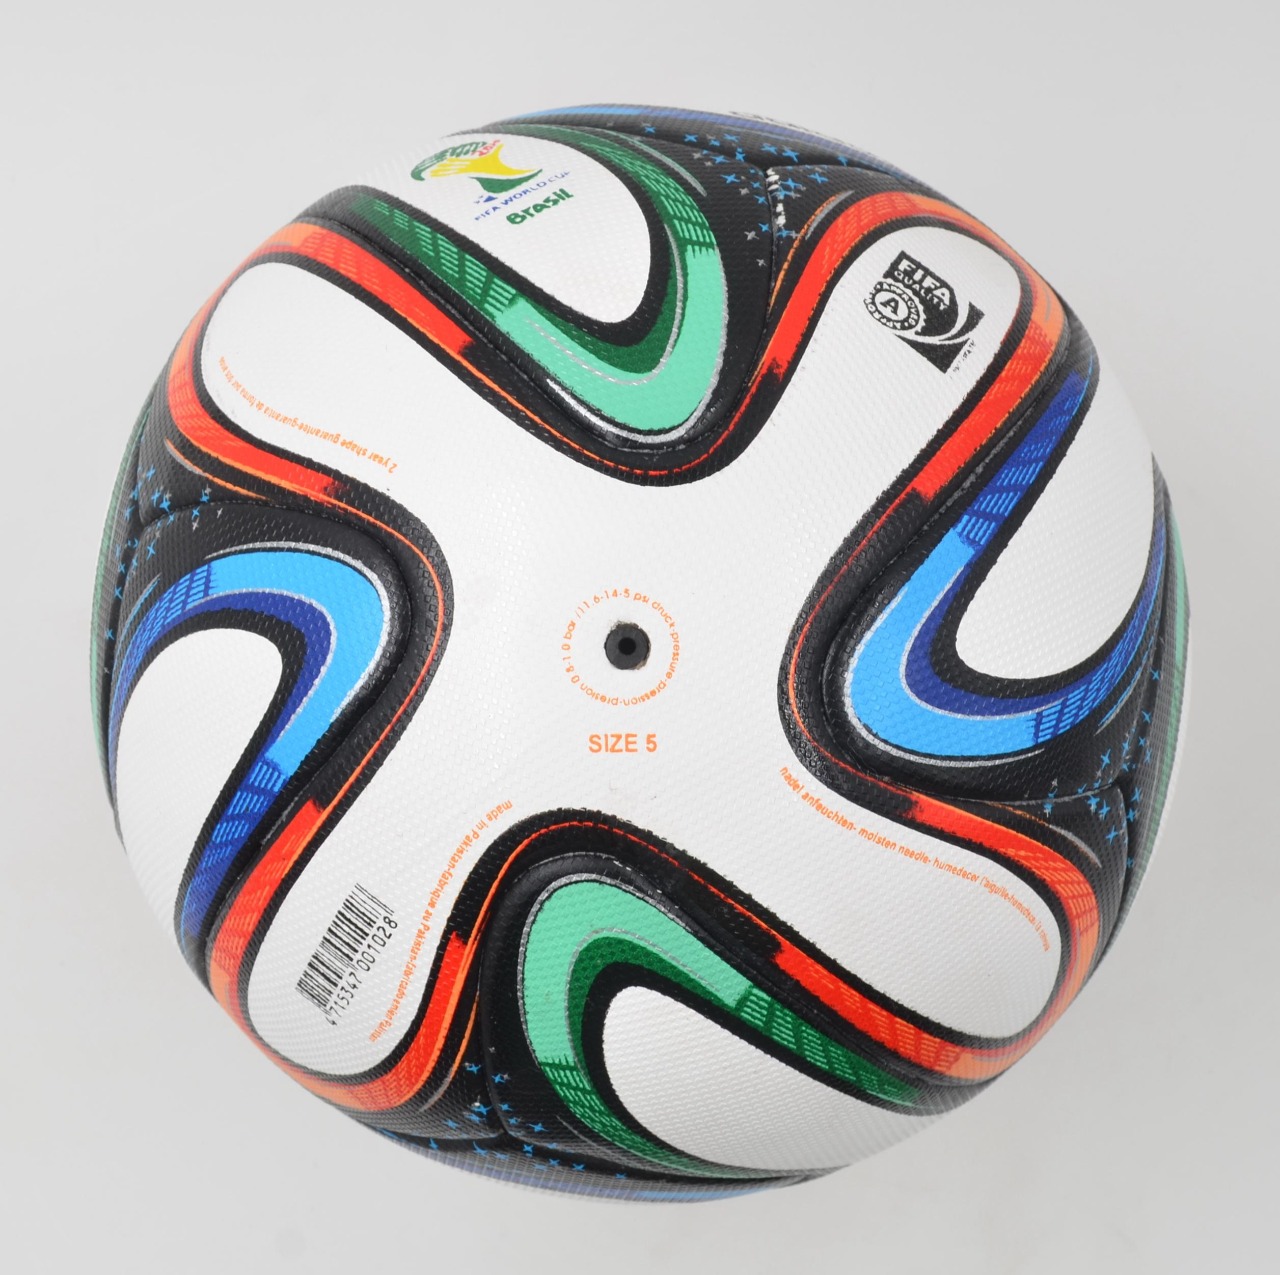 Adidas Brazuca Football 2014 Worldcup Thermal Molded